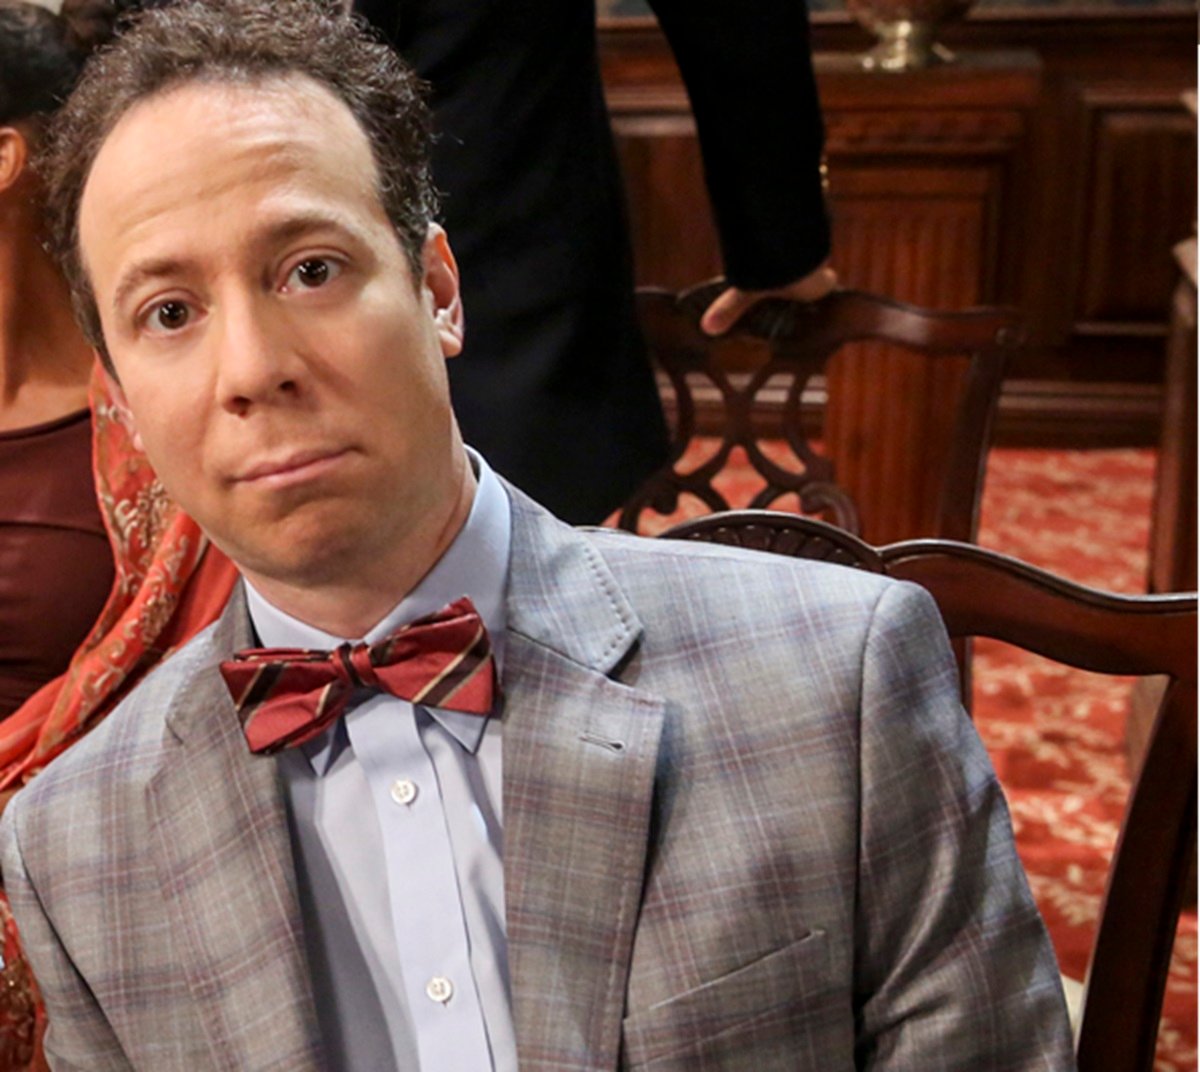 Stuart Bloom is seen as Sheldon and Amy's wedding in an episode of 'The Big Bang Theory'